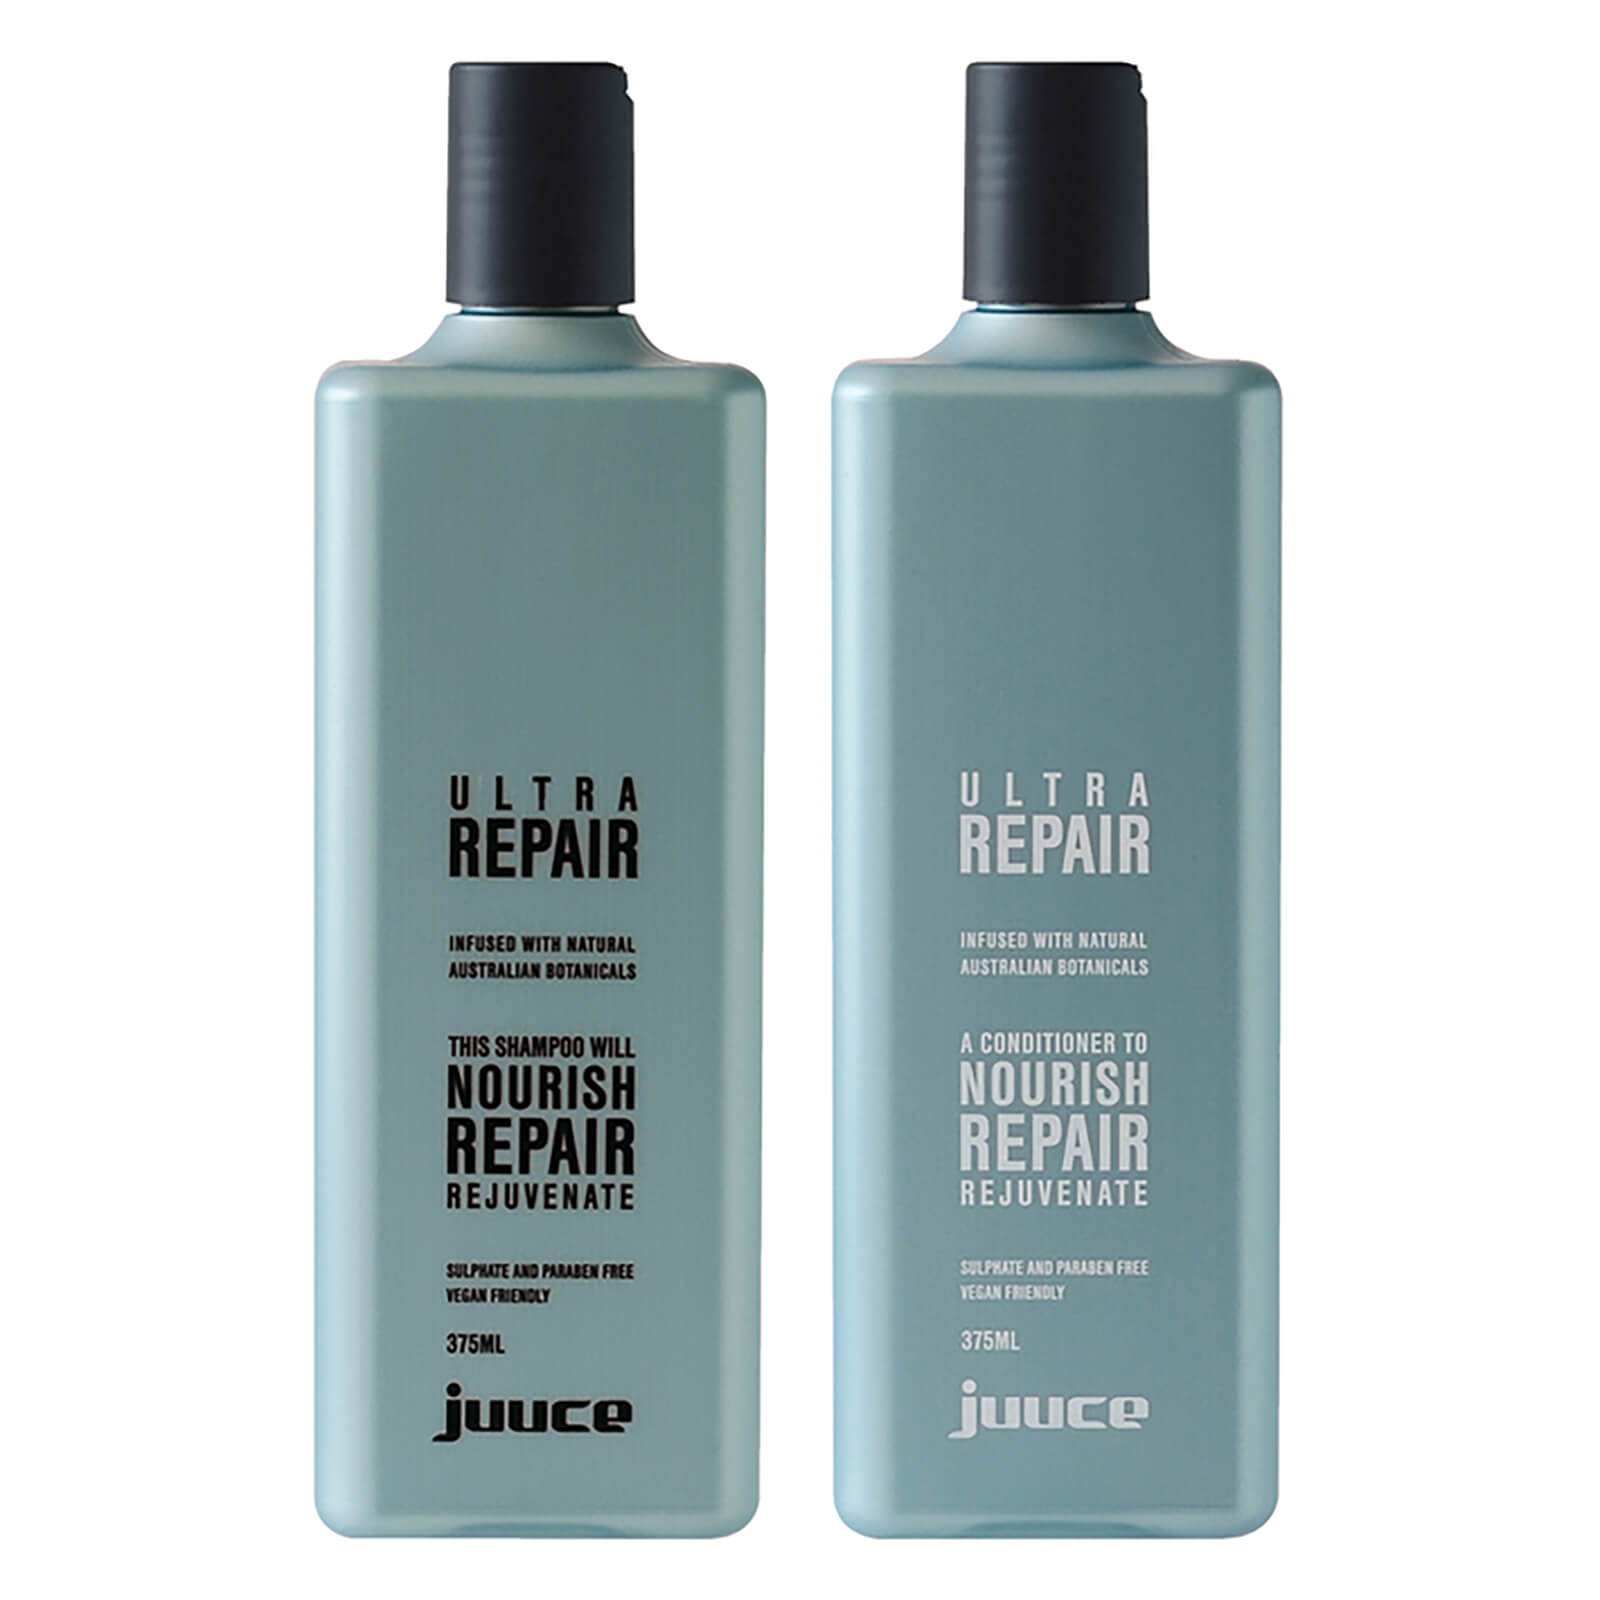 Juuce Ultra Repair Shampoo and Conditioner Duo